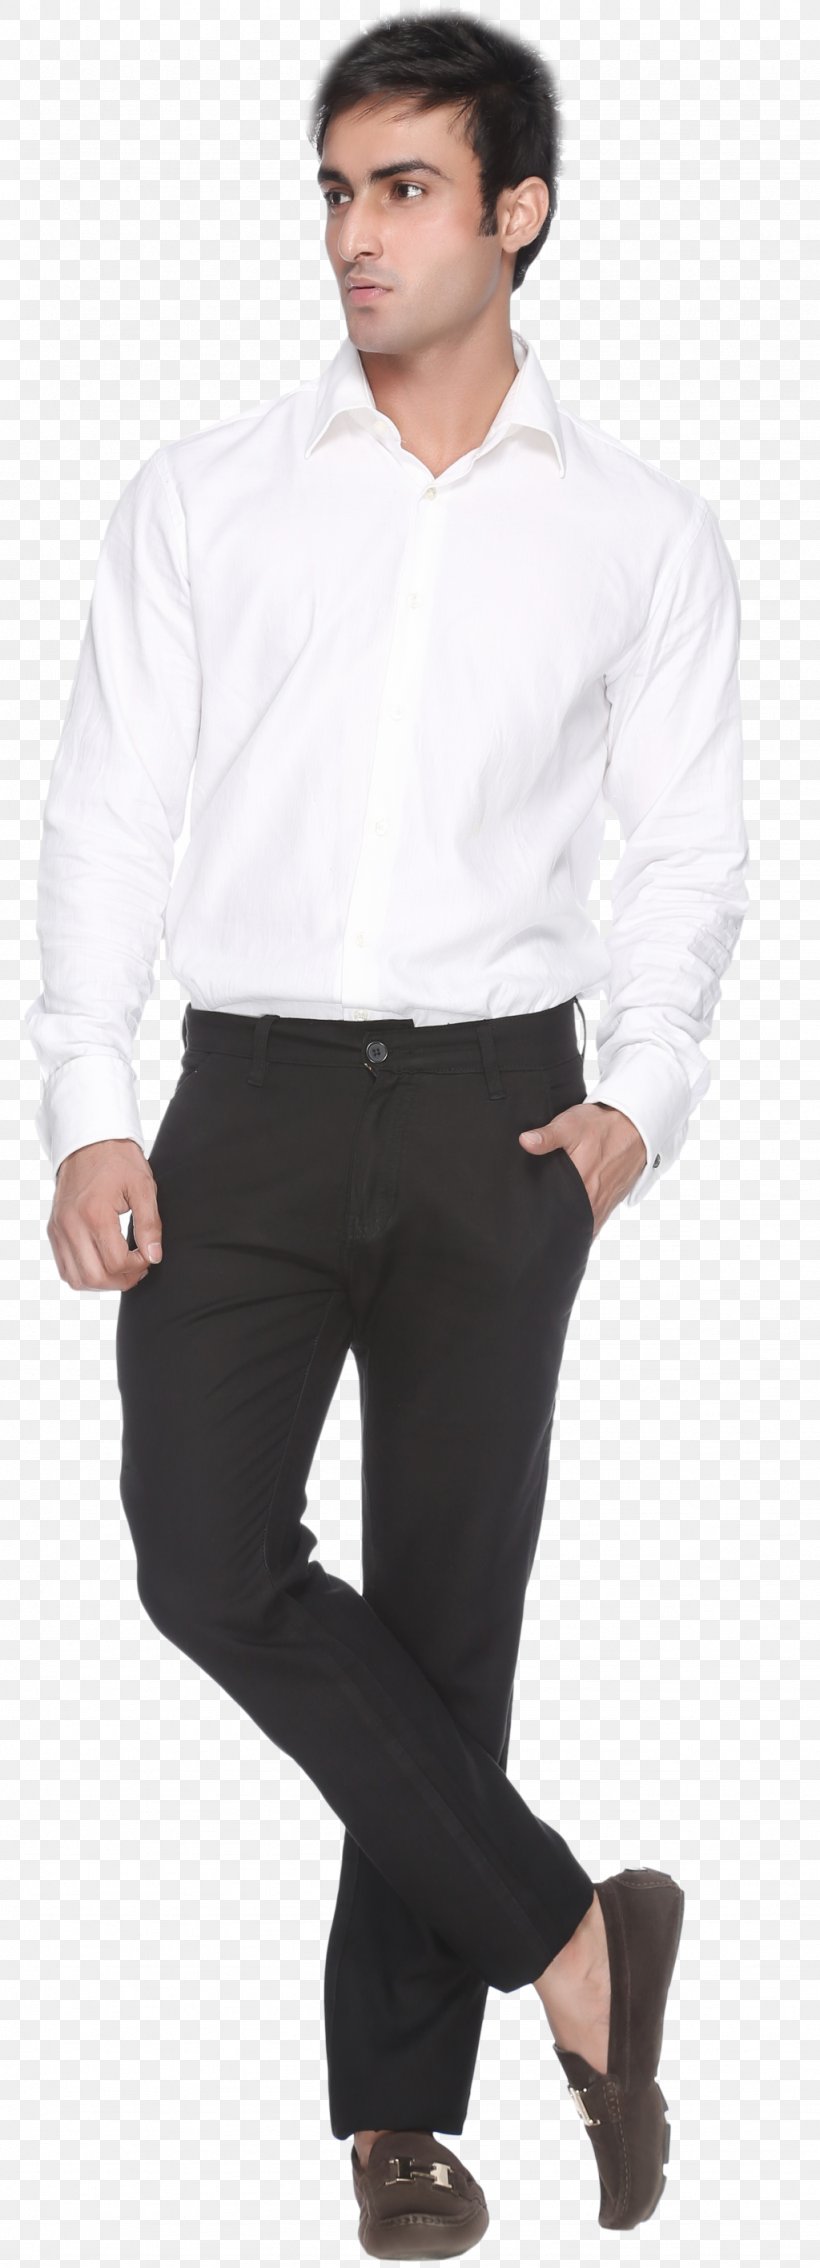 Clothing Formal Wear Pants Semi-formal Casual, PNG, 1024x2833px, Clothing, Abdomen, Casual, Collar, Dress Download Free